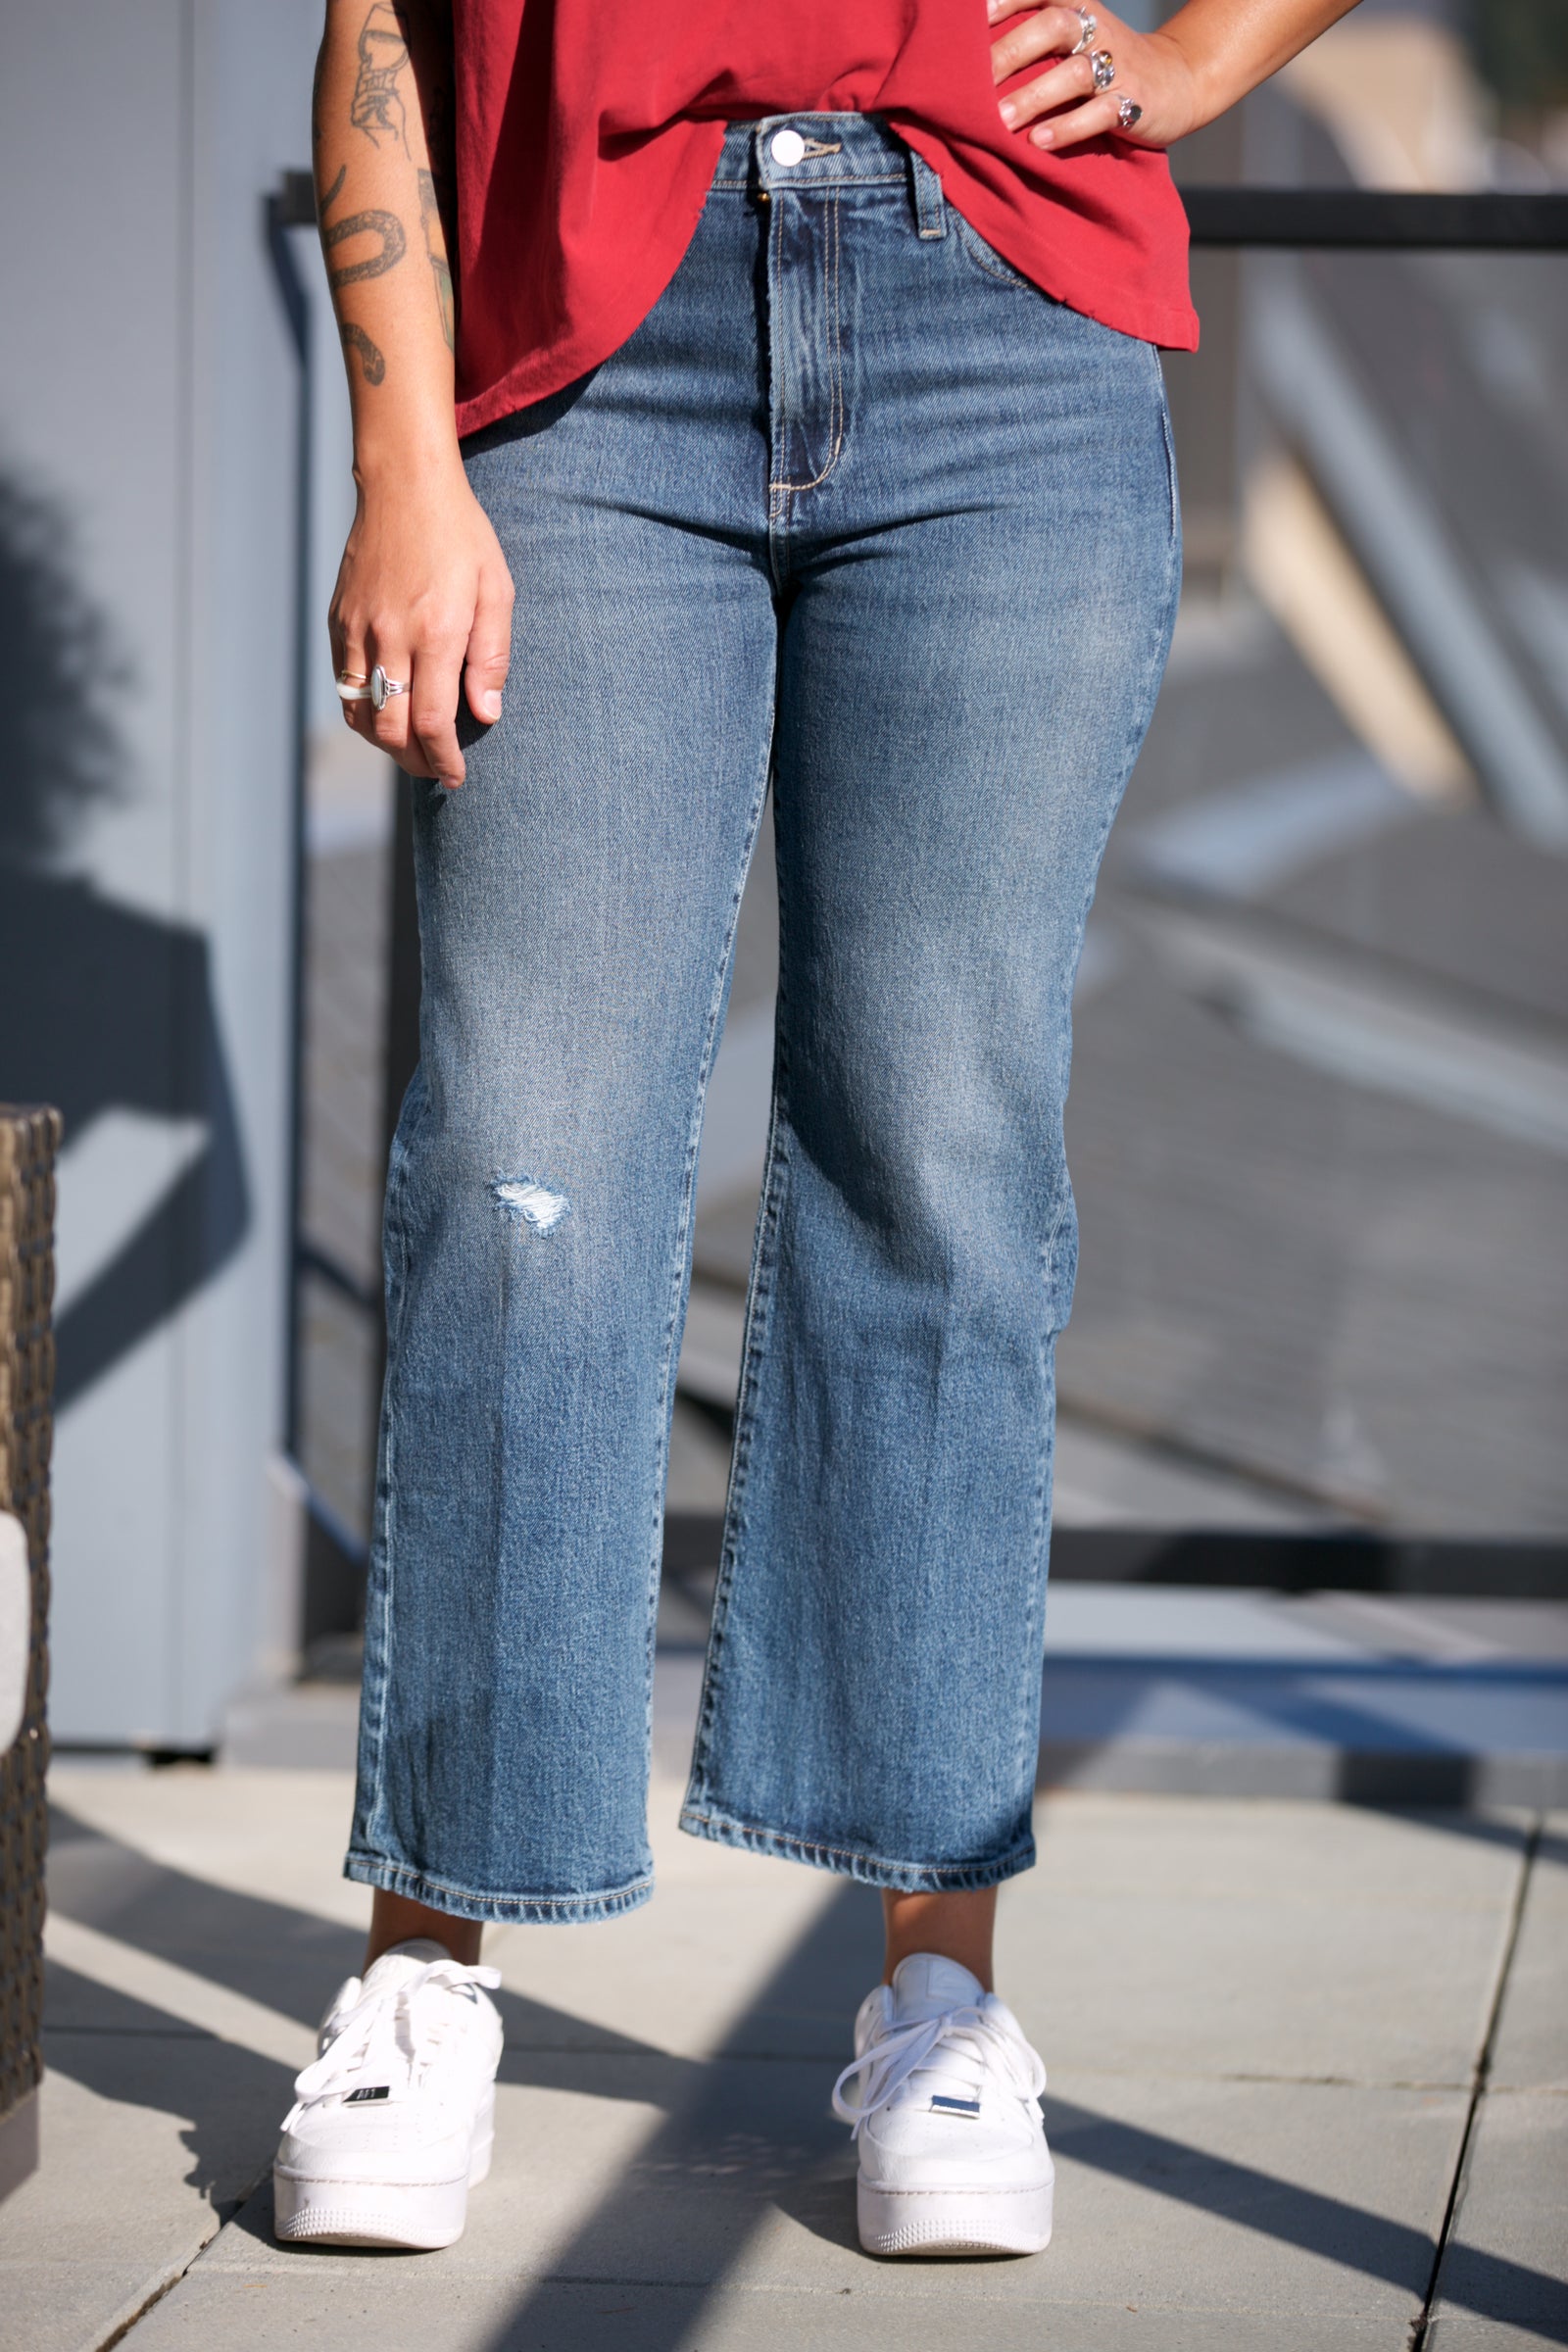 JOE'S JEANS The Callie High Rise Cropped Bootcut in Optimist - Adorn